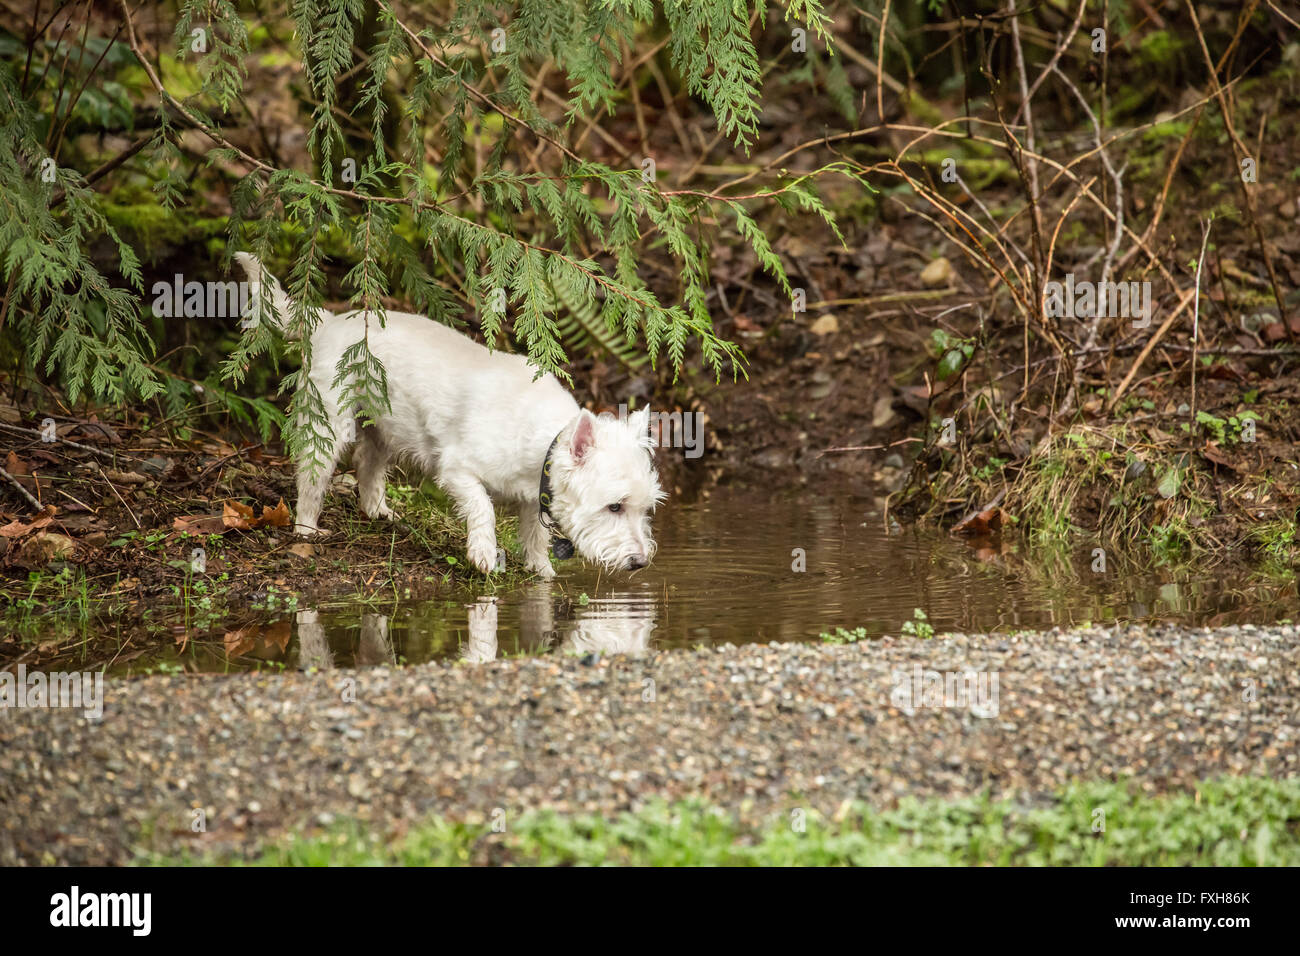 Zipper, a Westie, drinking water from a puddle, in Issaquah, Washington, USA Stock Photo